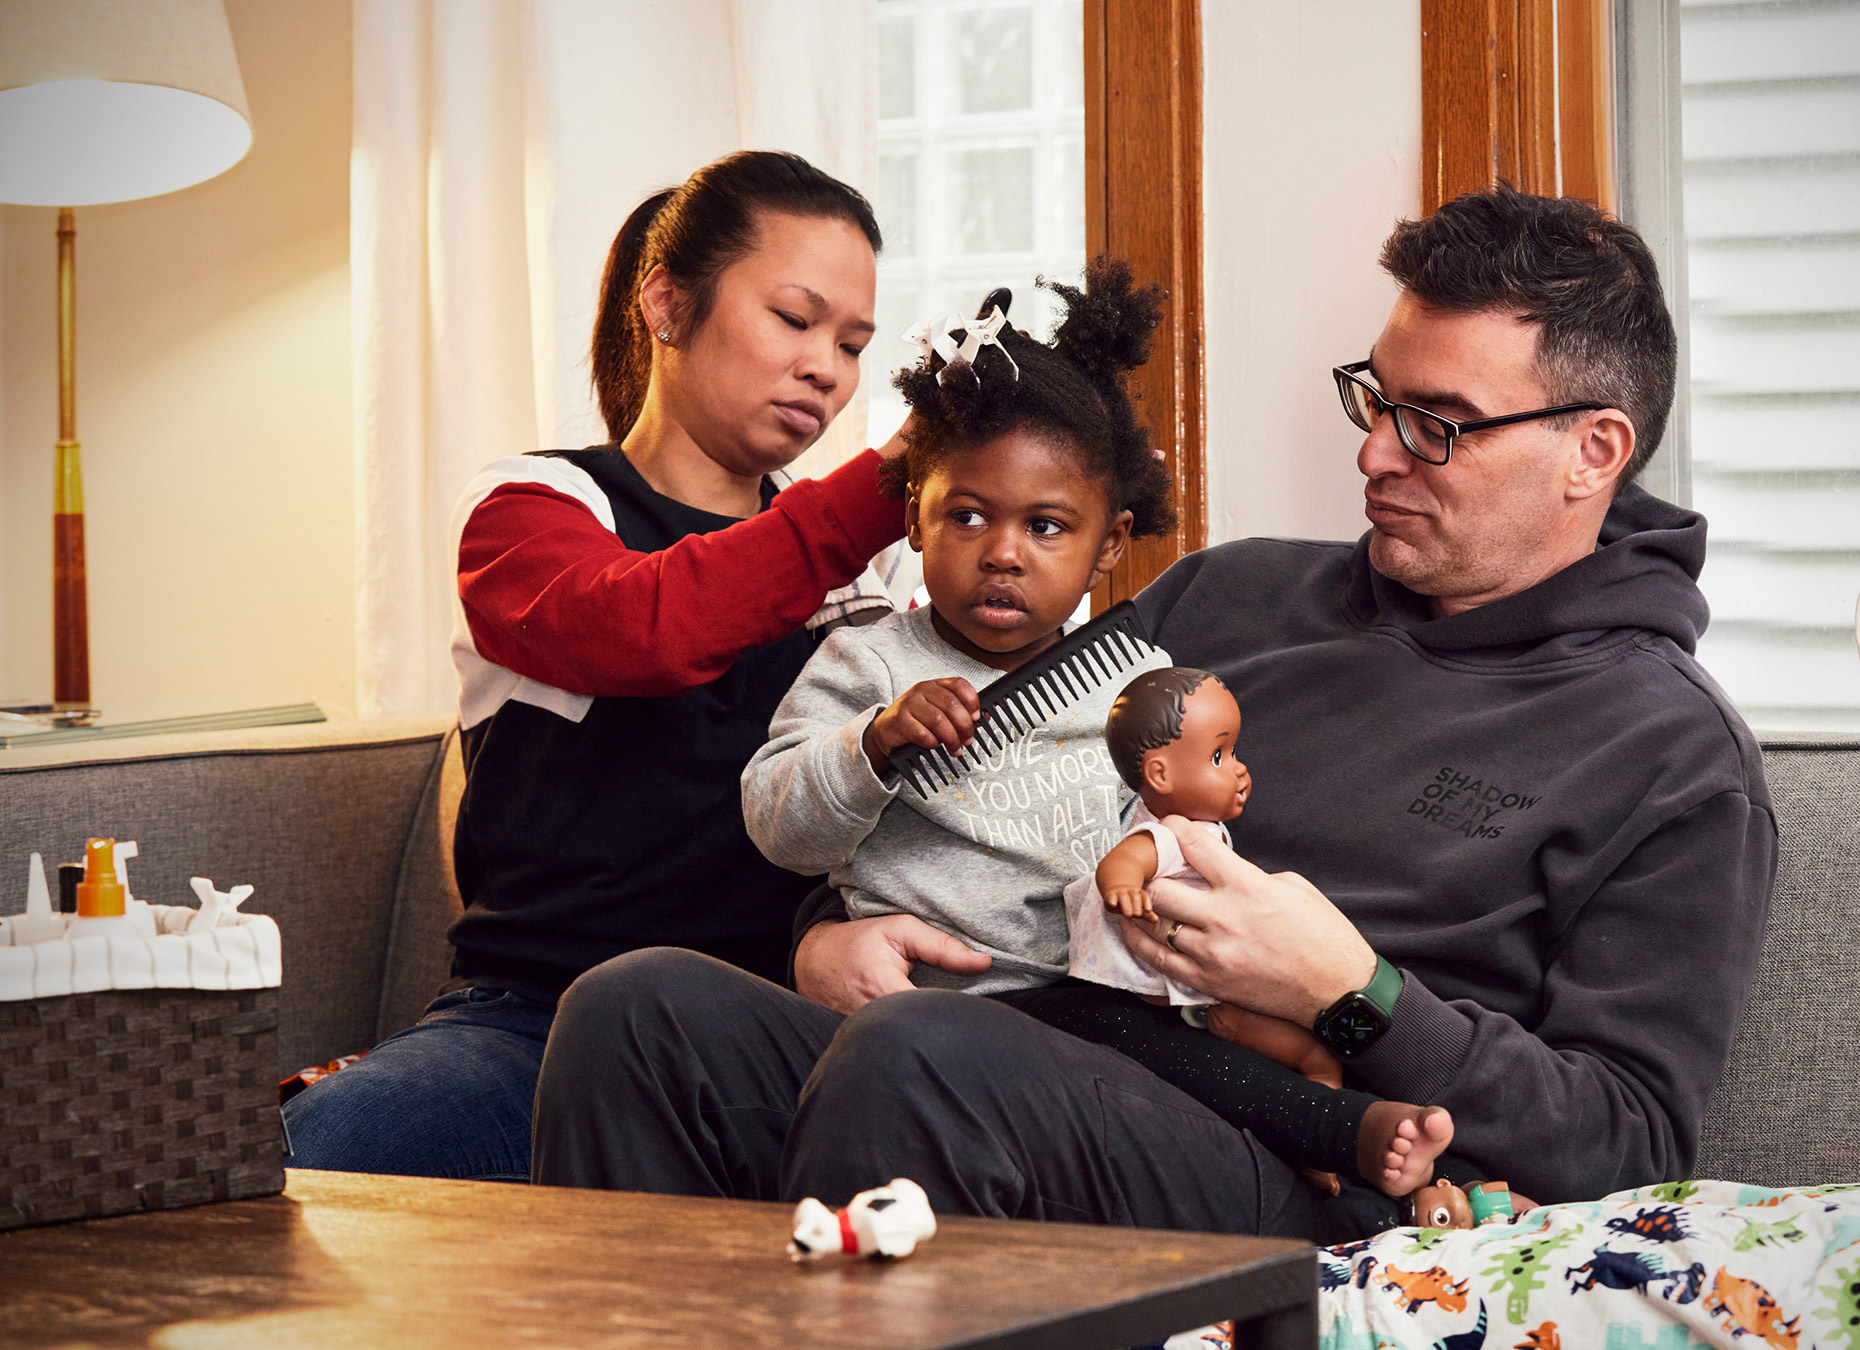 Interracial family doing hair on couch | Lifestyle and Childrens Photography by Saverio Truglia